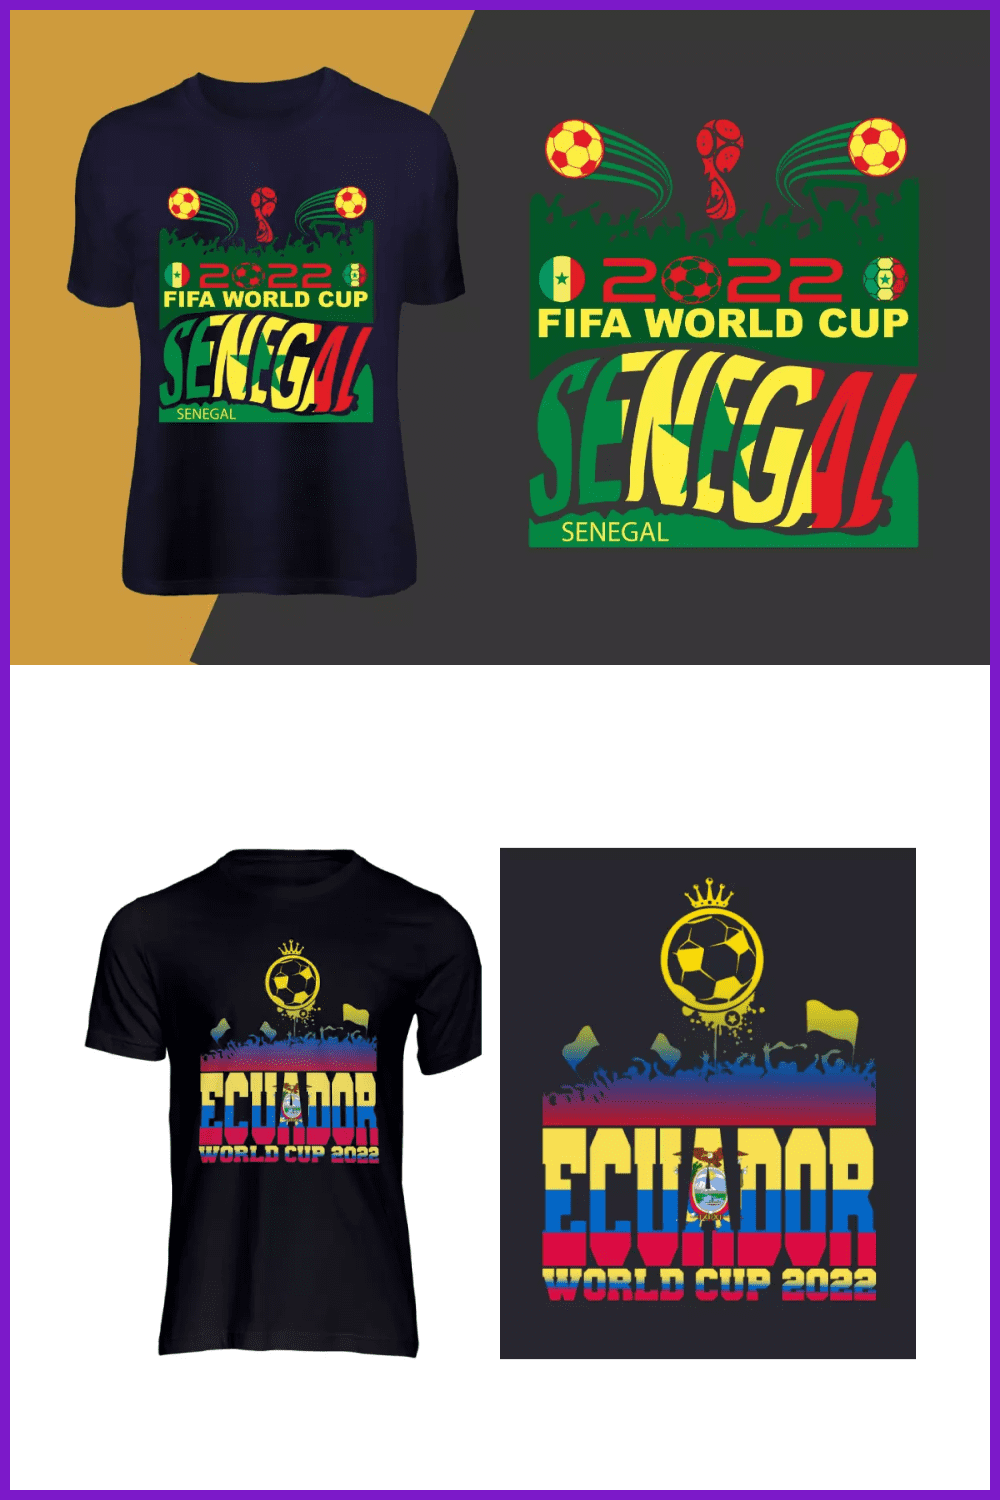 Black t-shirts with the names of the countries of Senegal and Ecuador in the colors of the national flags.